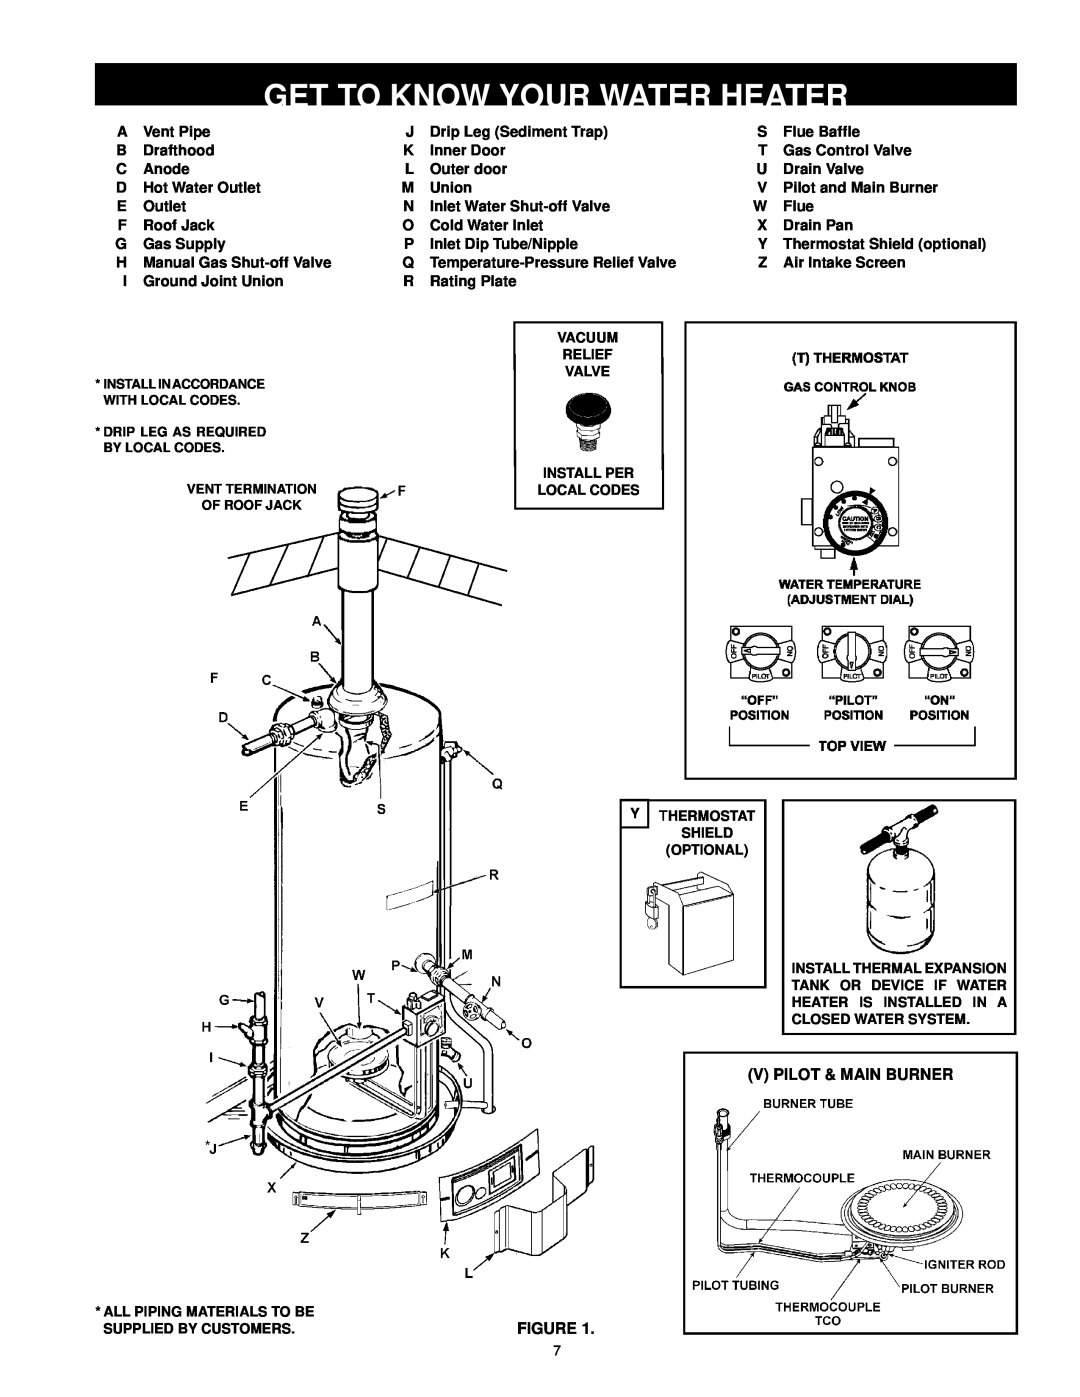 Kenmore 153.33385 owner manual Get To Know Your Water Heater, V Pilot & Main Burner, Figure 